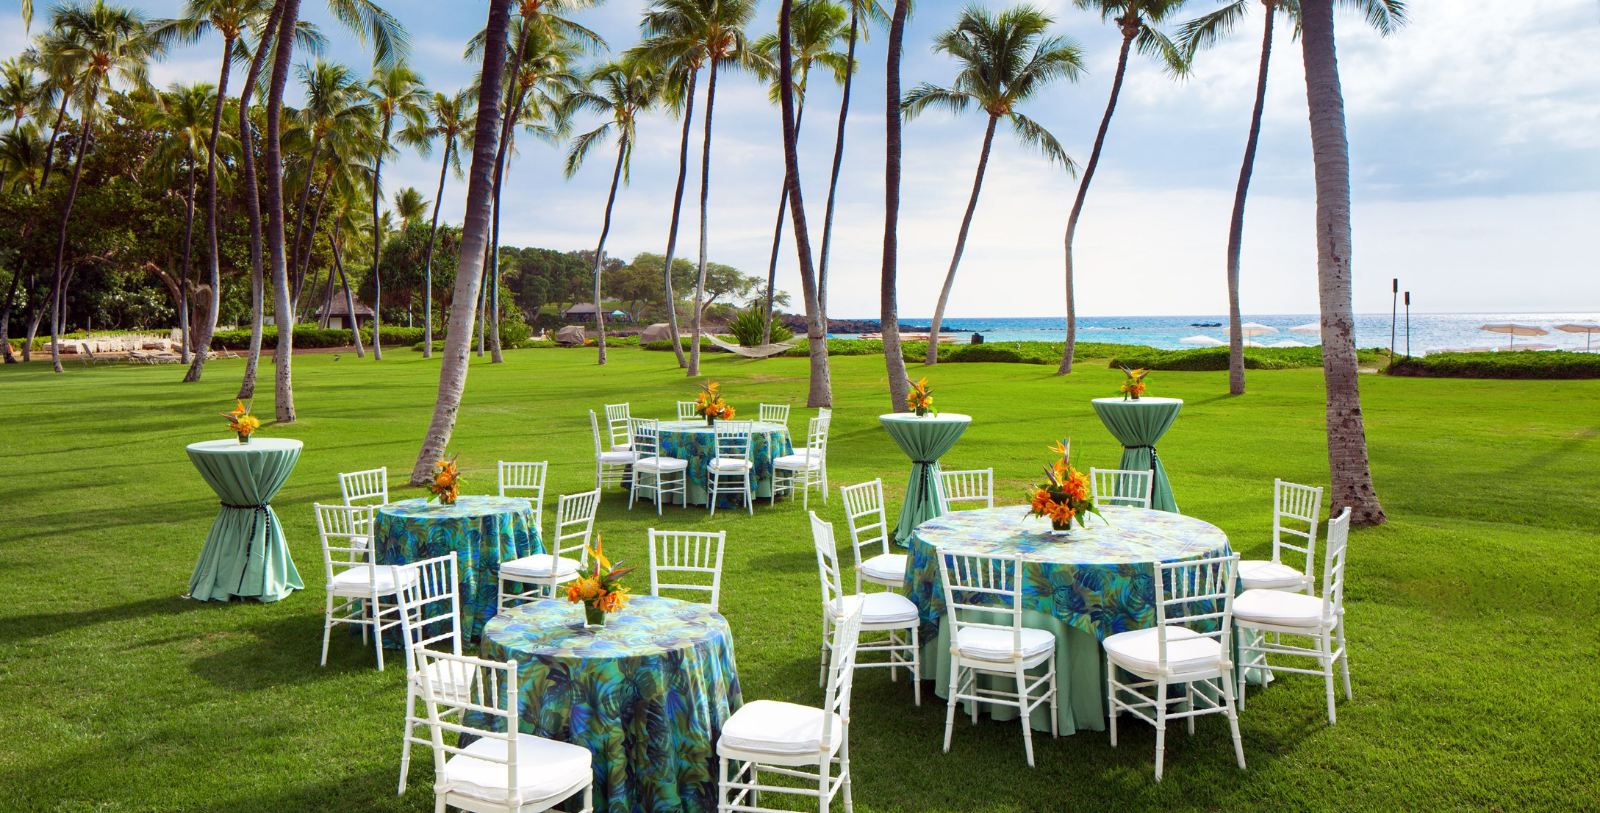 Image of Event on South Pointe Lawn, Mauna Kea Beach Hotel, Kohala Coast, Hawaii, 1965, Member of Historic Hotels of America, Special Occasions